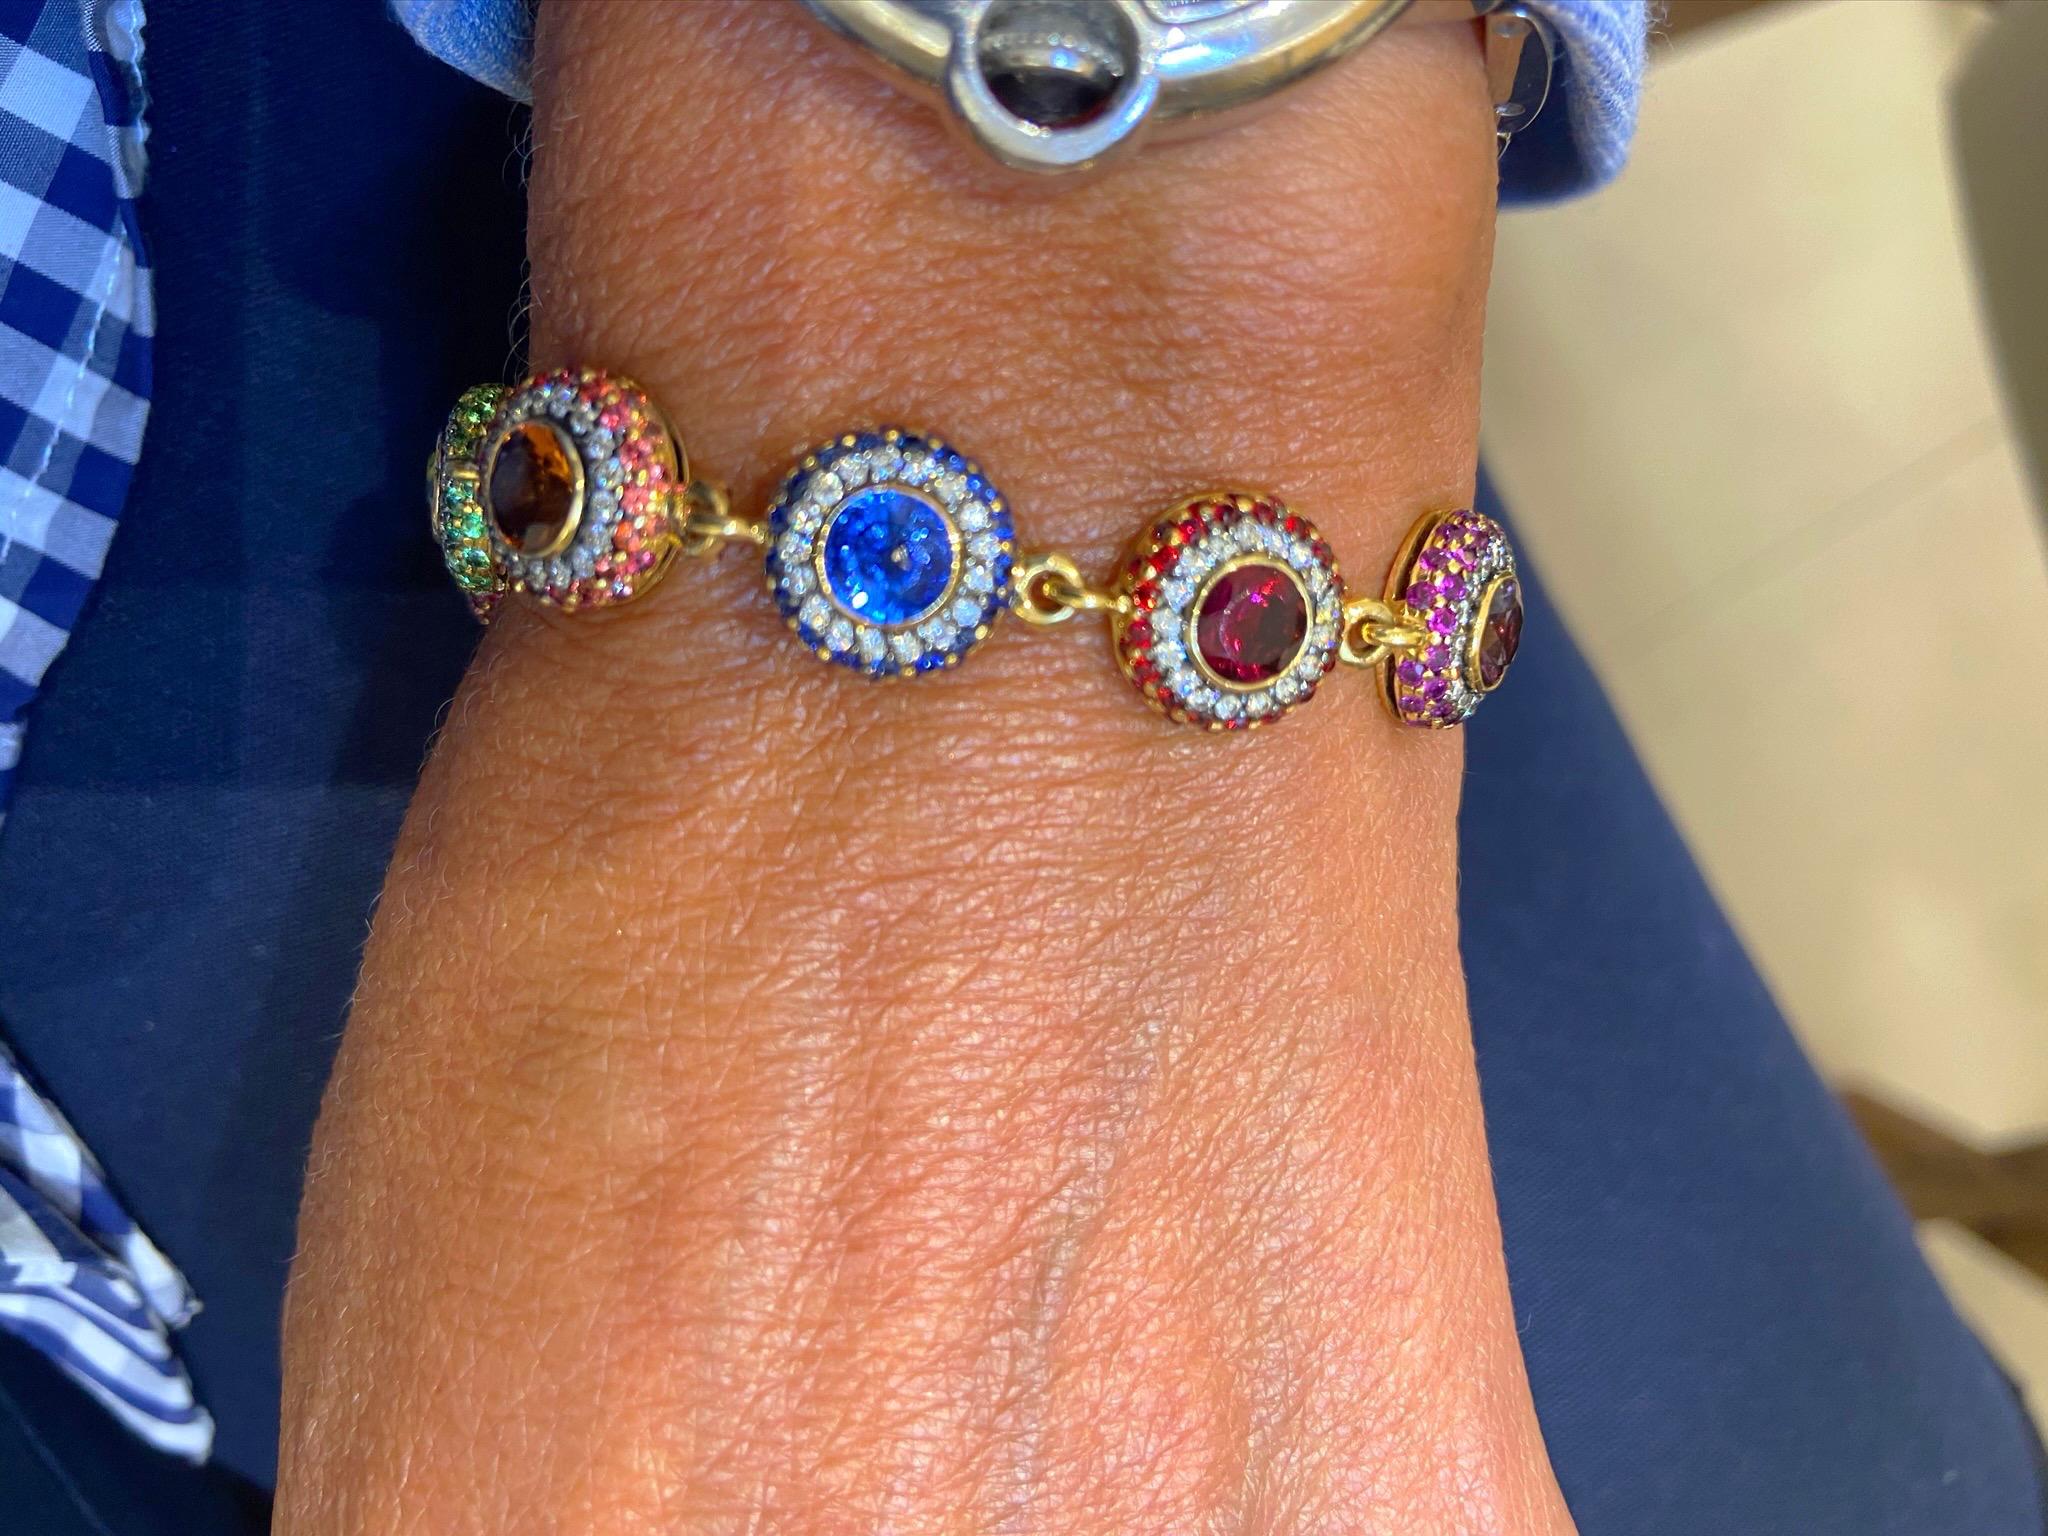 Zorab 18Kt YG Bracelet with Diamonds, Multicolored Sapphires and Semi Precious In New Condition For Sale In New York, NY